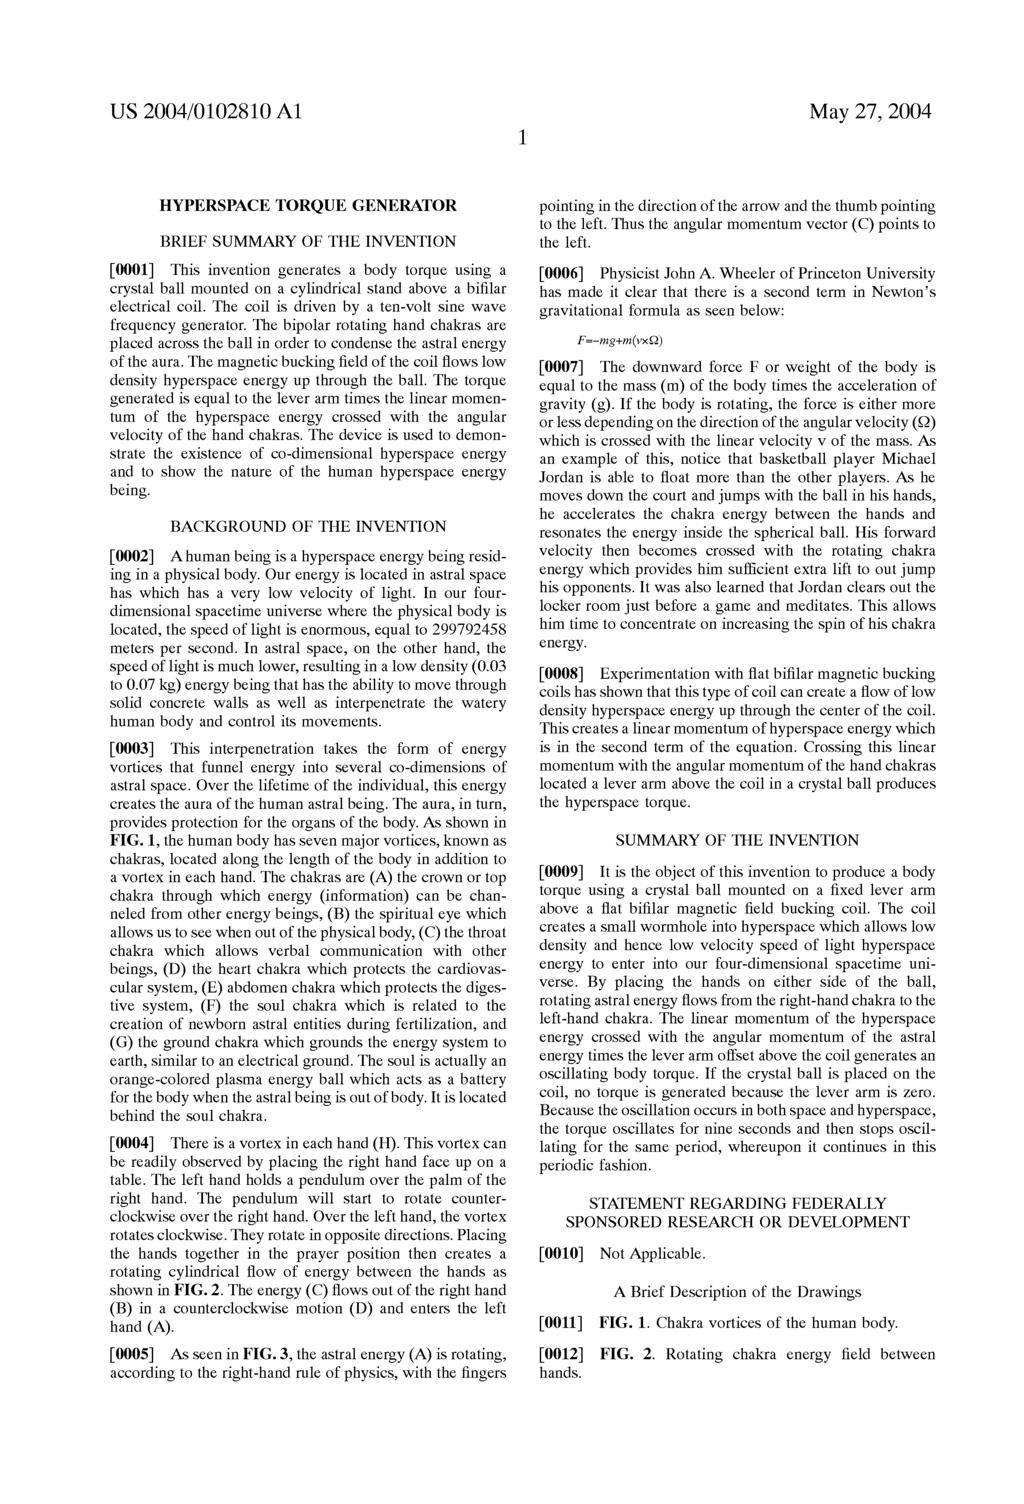 US 2004/010281.0 A1 May 27, 2004 HYPERSPACE TORQUE GENERATOR BRIEF SUMMARY OF THE INVENTION 0001.